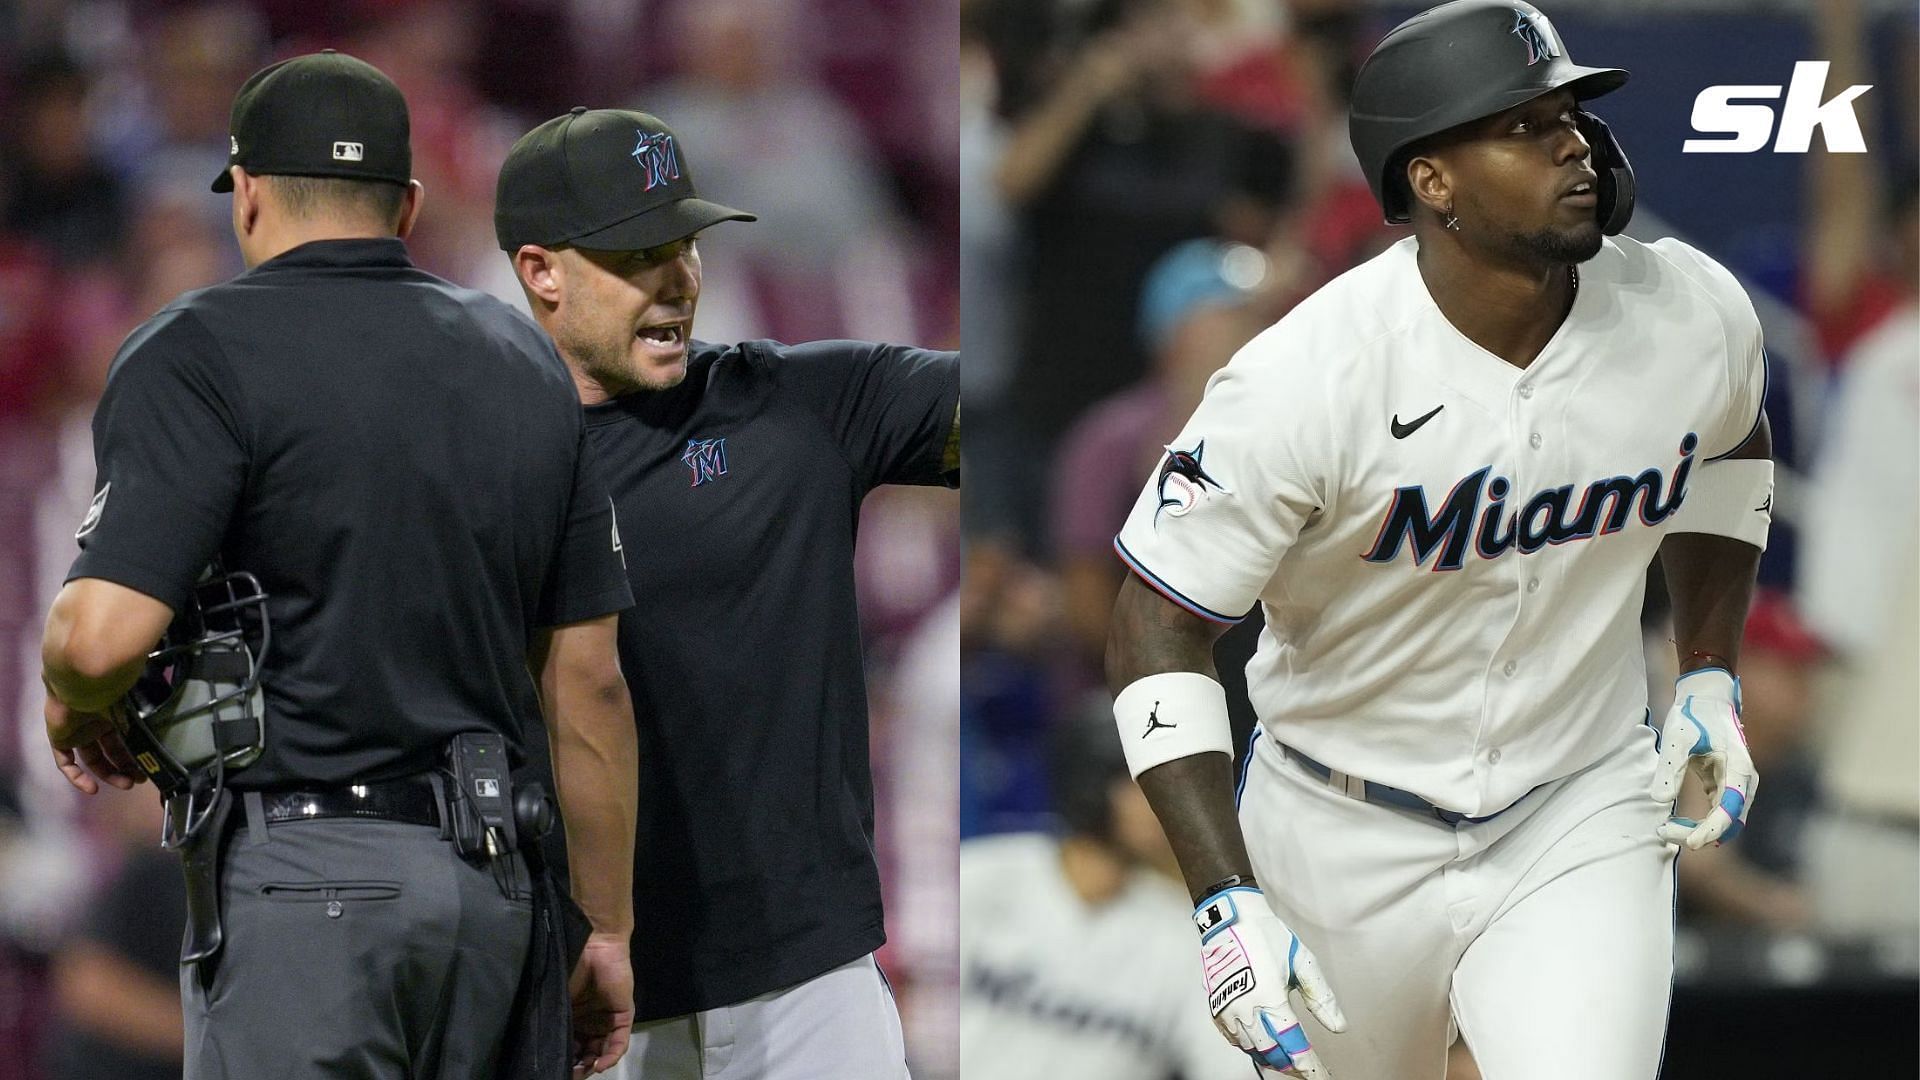 Jorge Soler Skip Schumaker ejection: What happened to Jorge Soler and Skip  Schumaker? Marlins slugger and manager ejected from game vs Reds